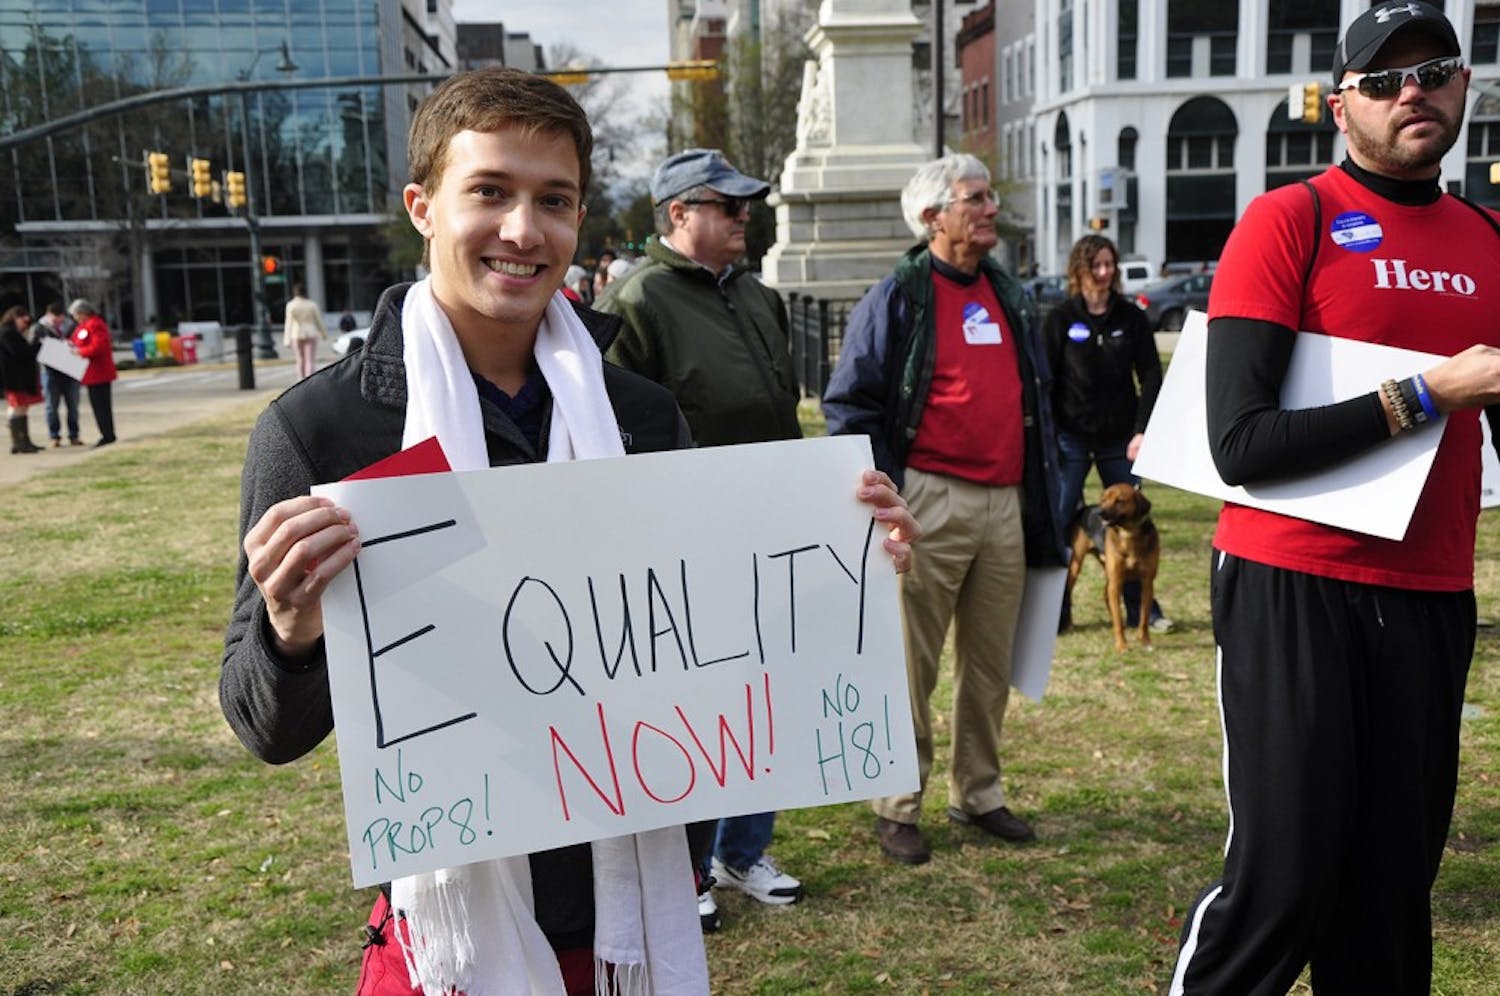 Second-year biology student Brice Duckworth shows support for same-sex marriage at the rally on Tuesday.